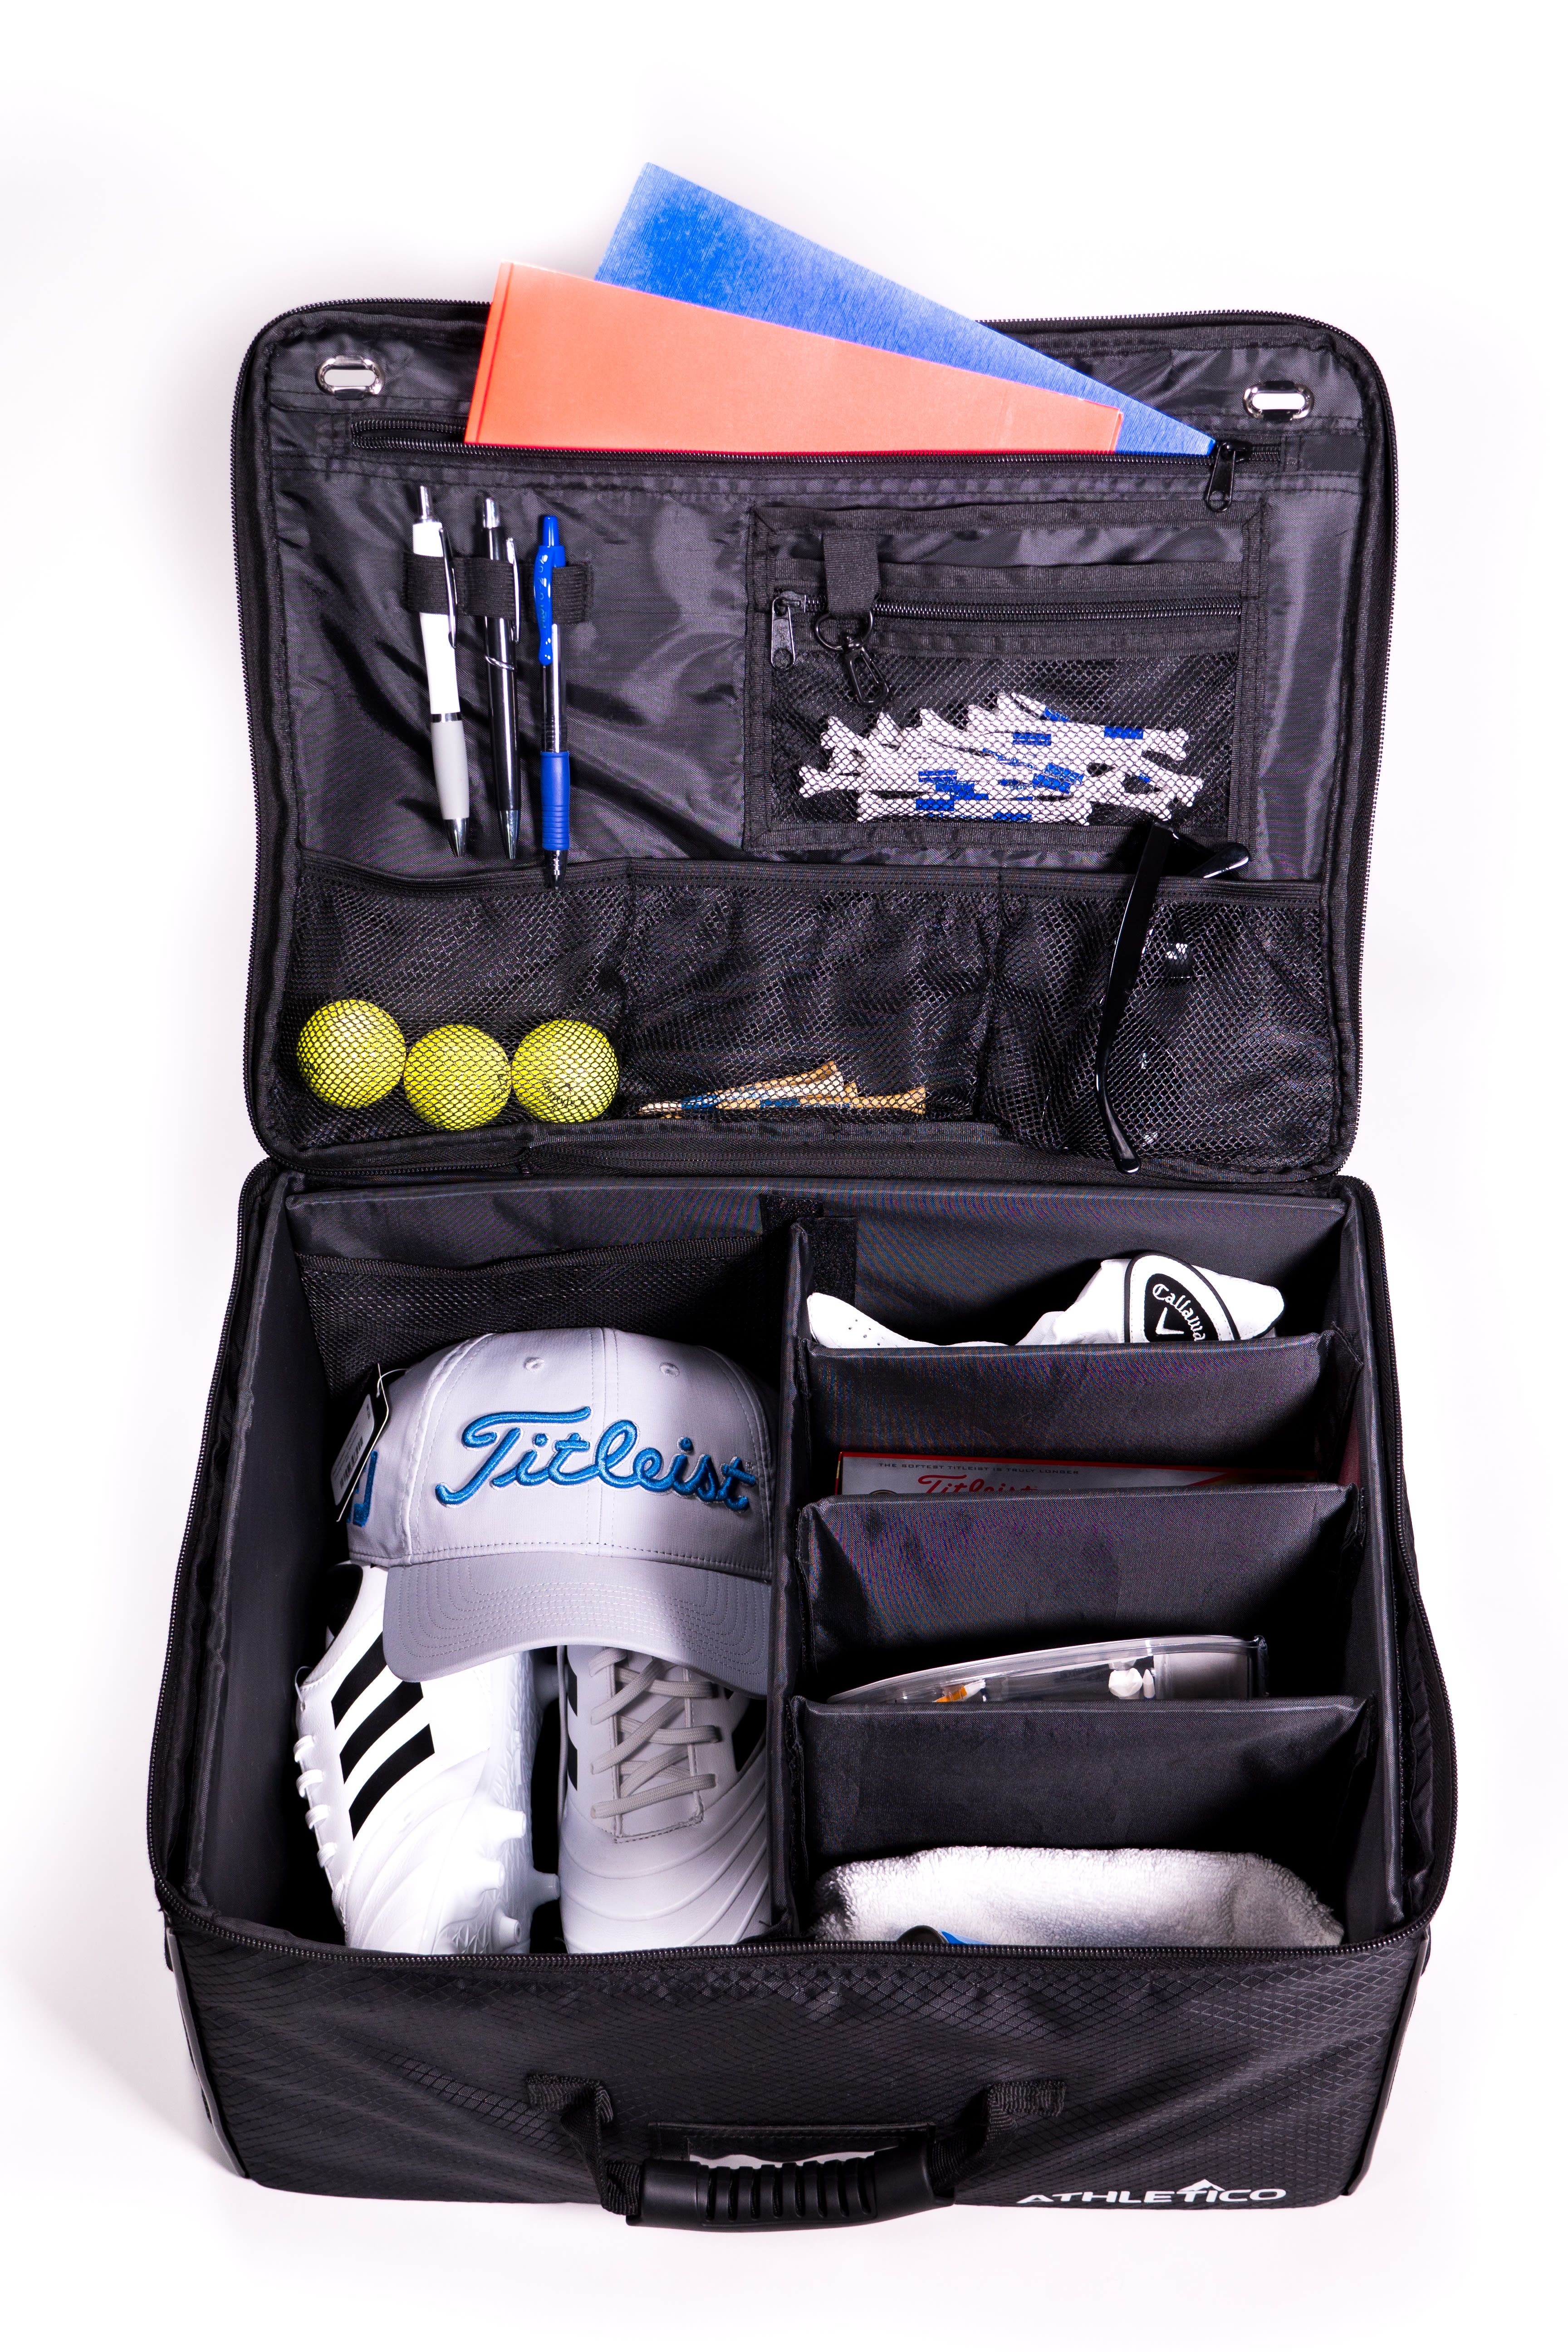 Multiple compartments within the Golf Organizer can hold shoes, balls, tees, hats and more.